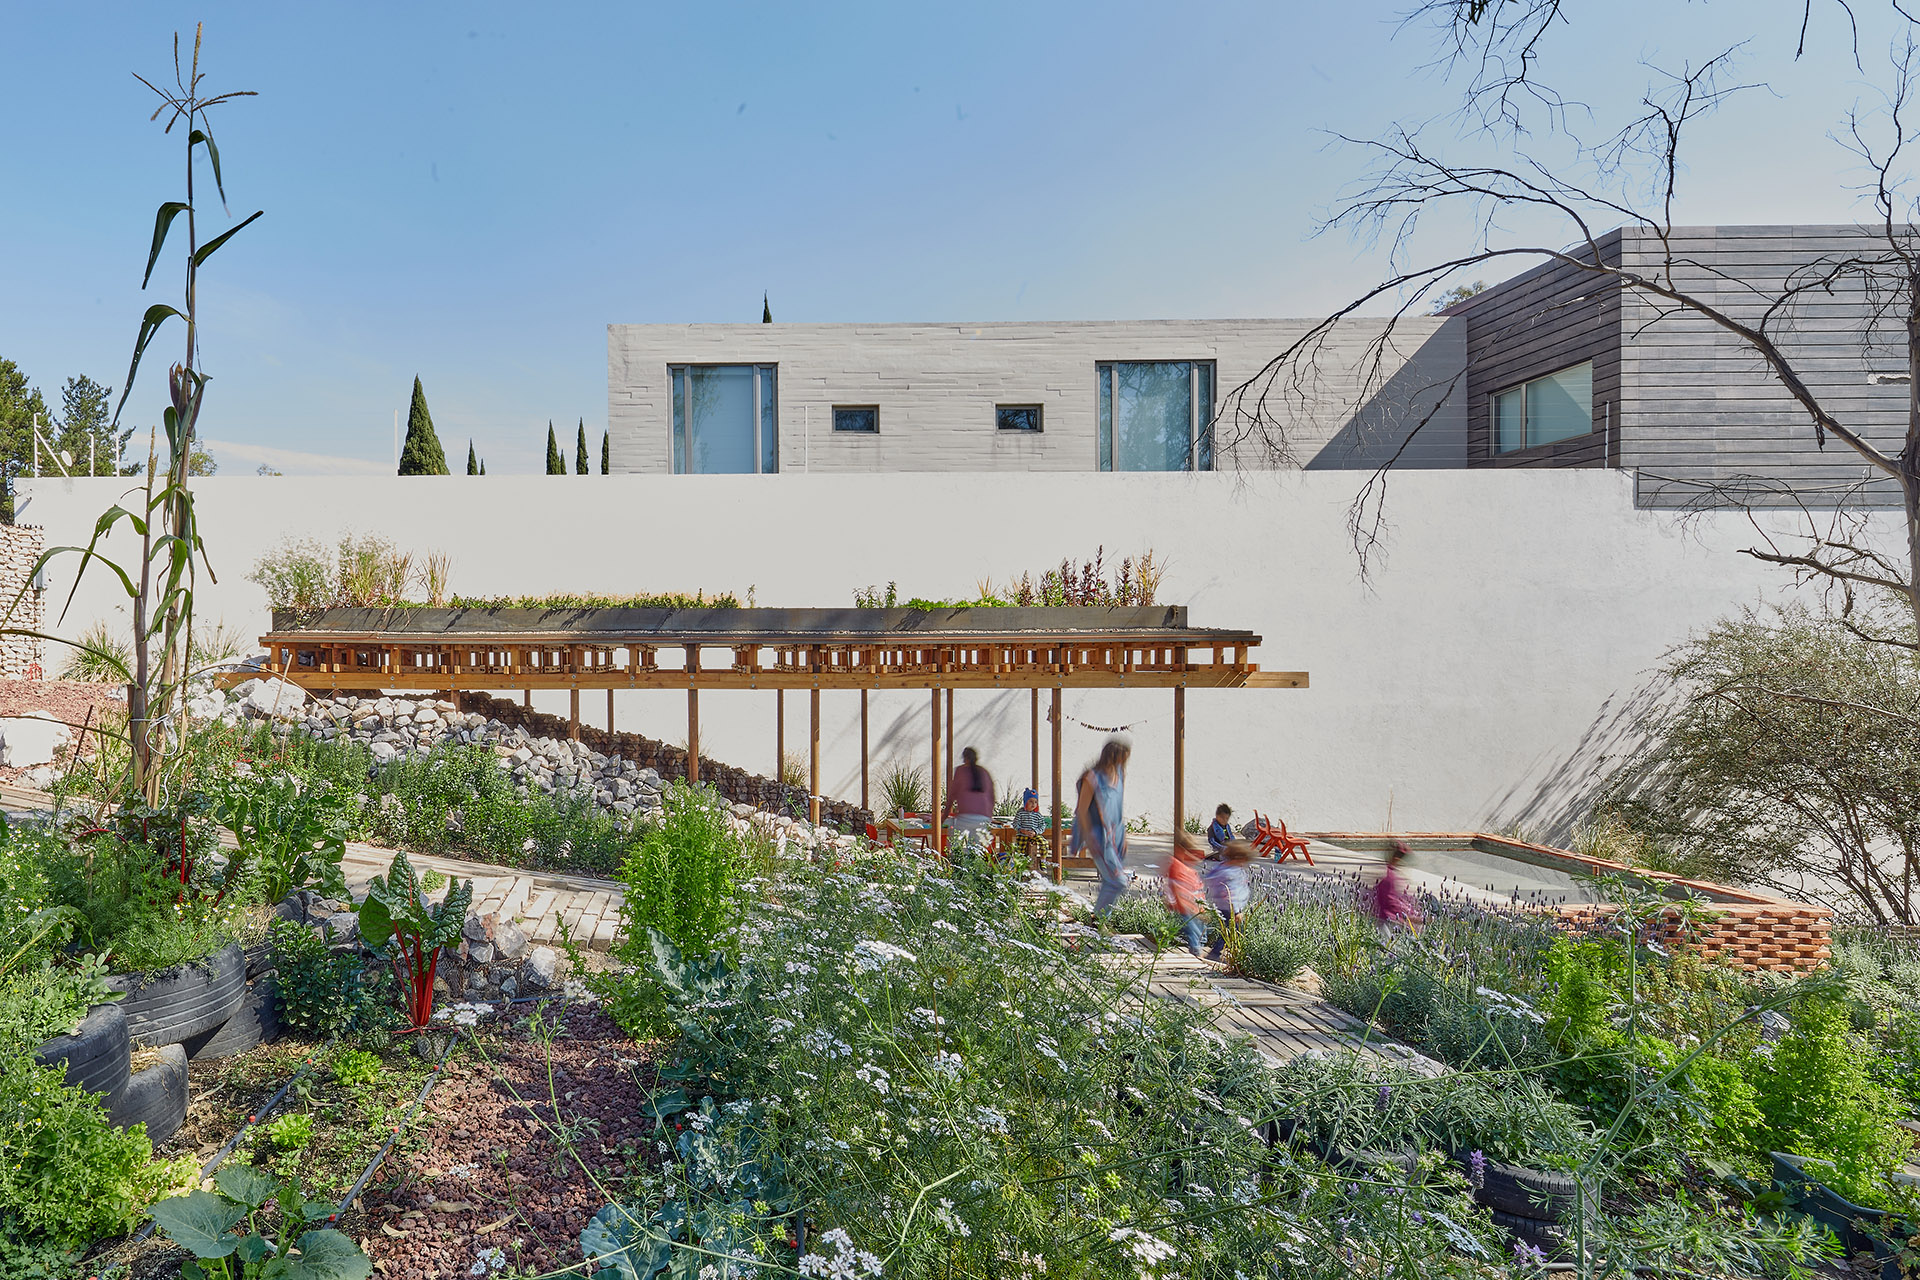 El Terreno. An urban garden designed as an area in order to educate about environmental sustainability